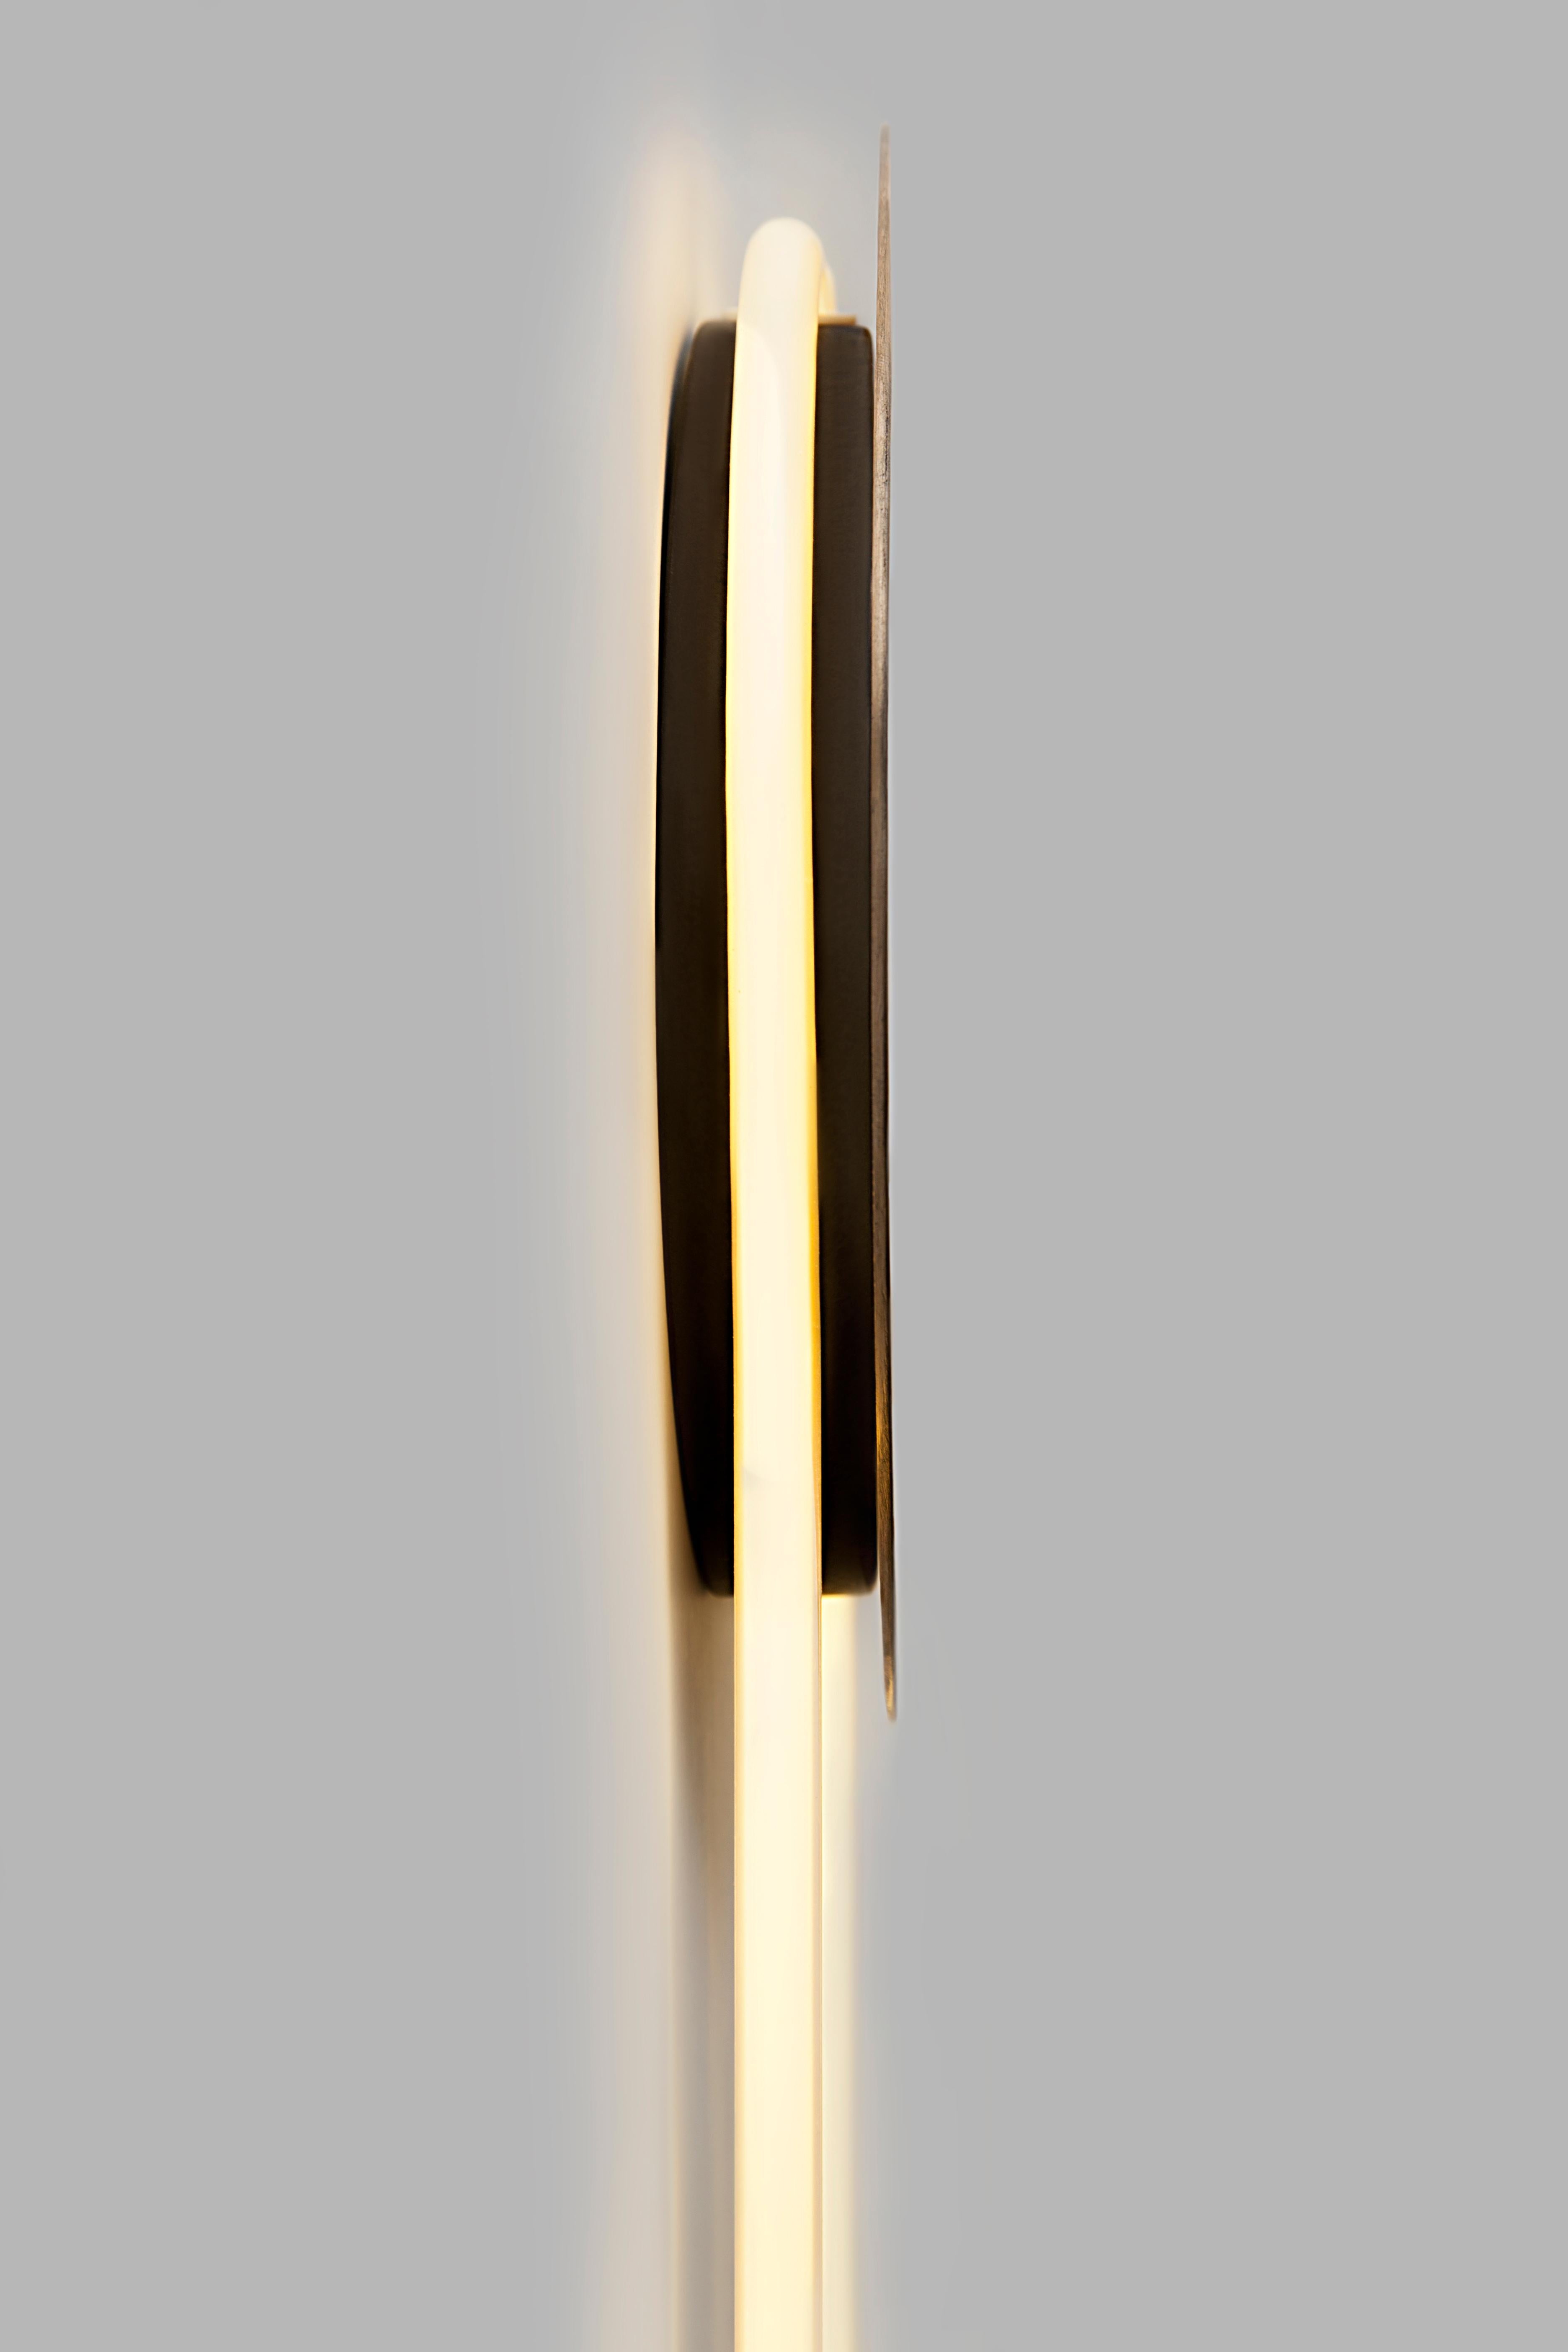 Plated Ra Wall 12K Gold Hand Bent Neon Wall Sconce Lighting by Studio d'Armes For Sale